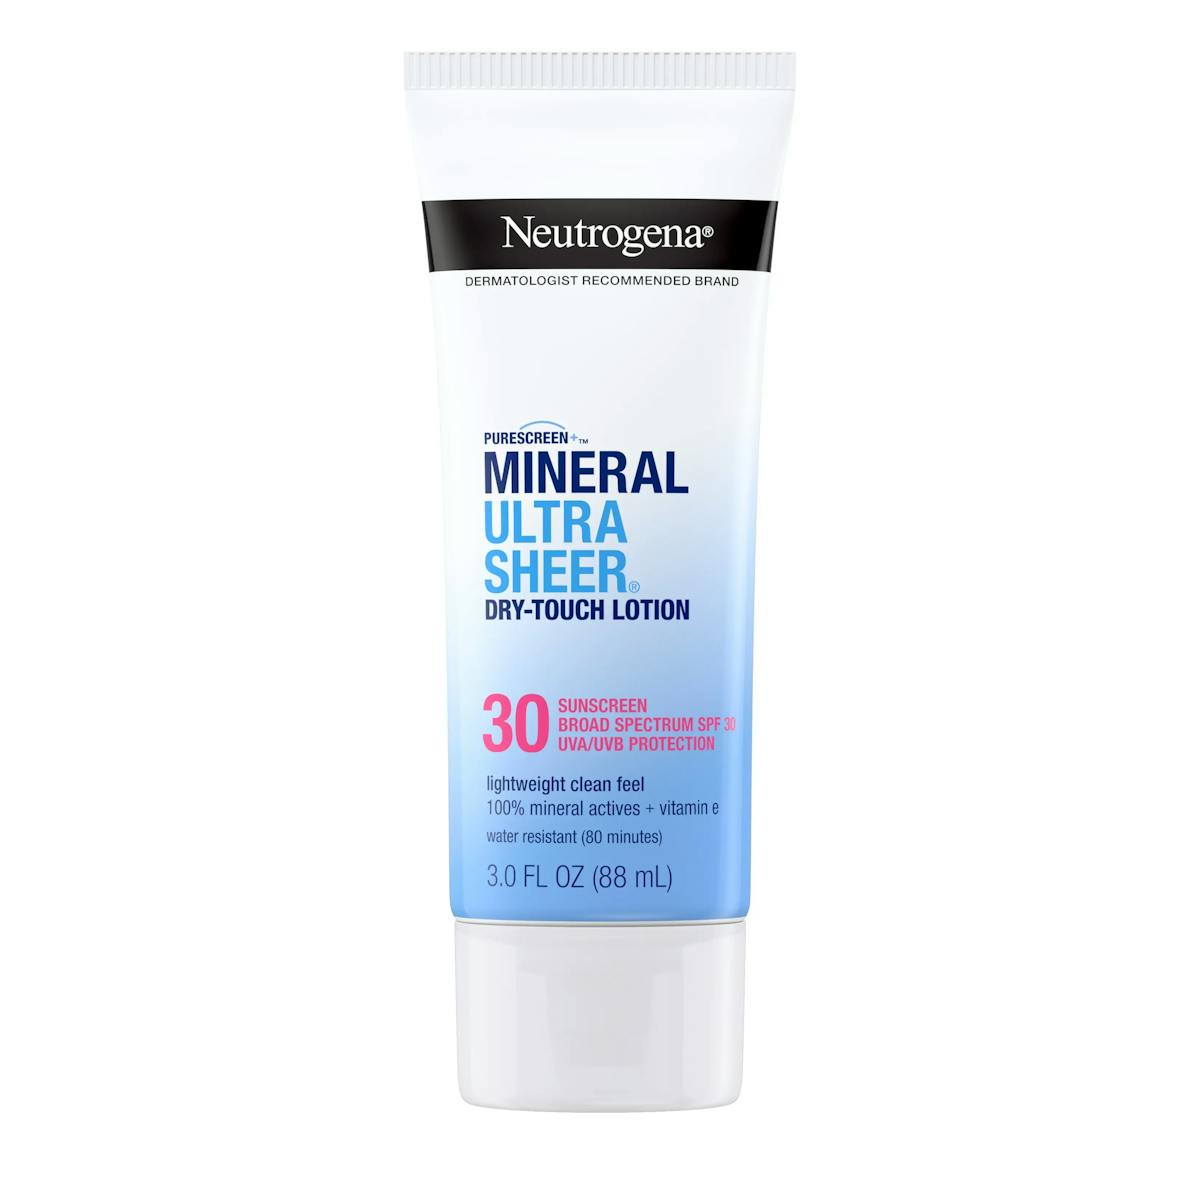 Neutrogena PureScreen+ Mineral Ultra Sheer Dry-Touch Lotion Broad Spectrum